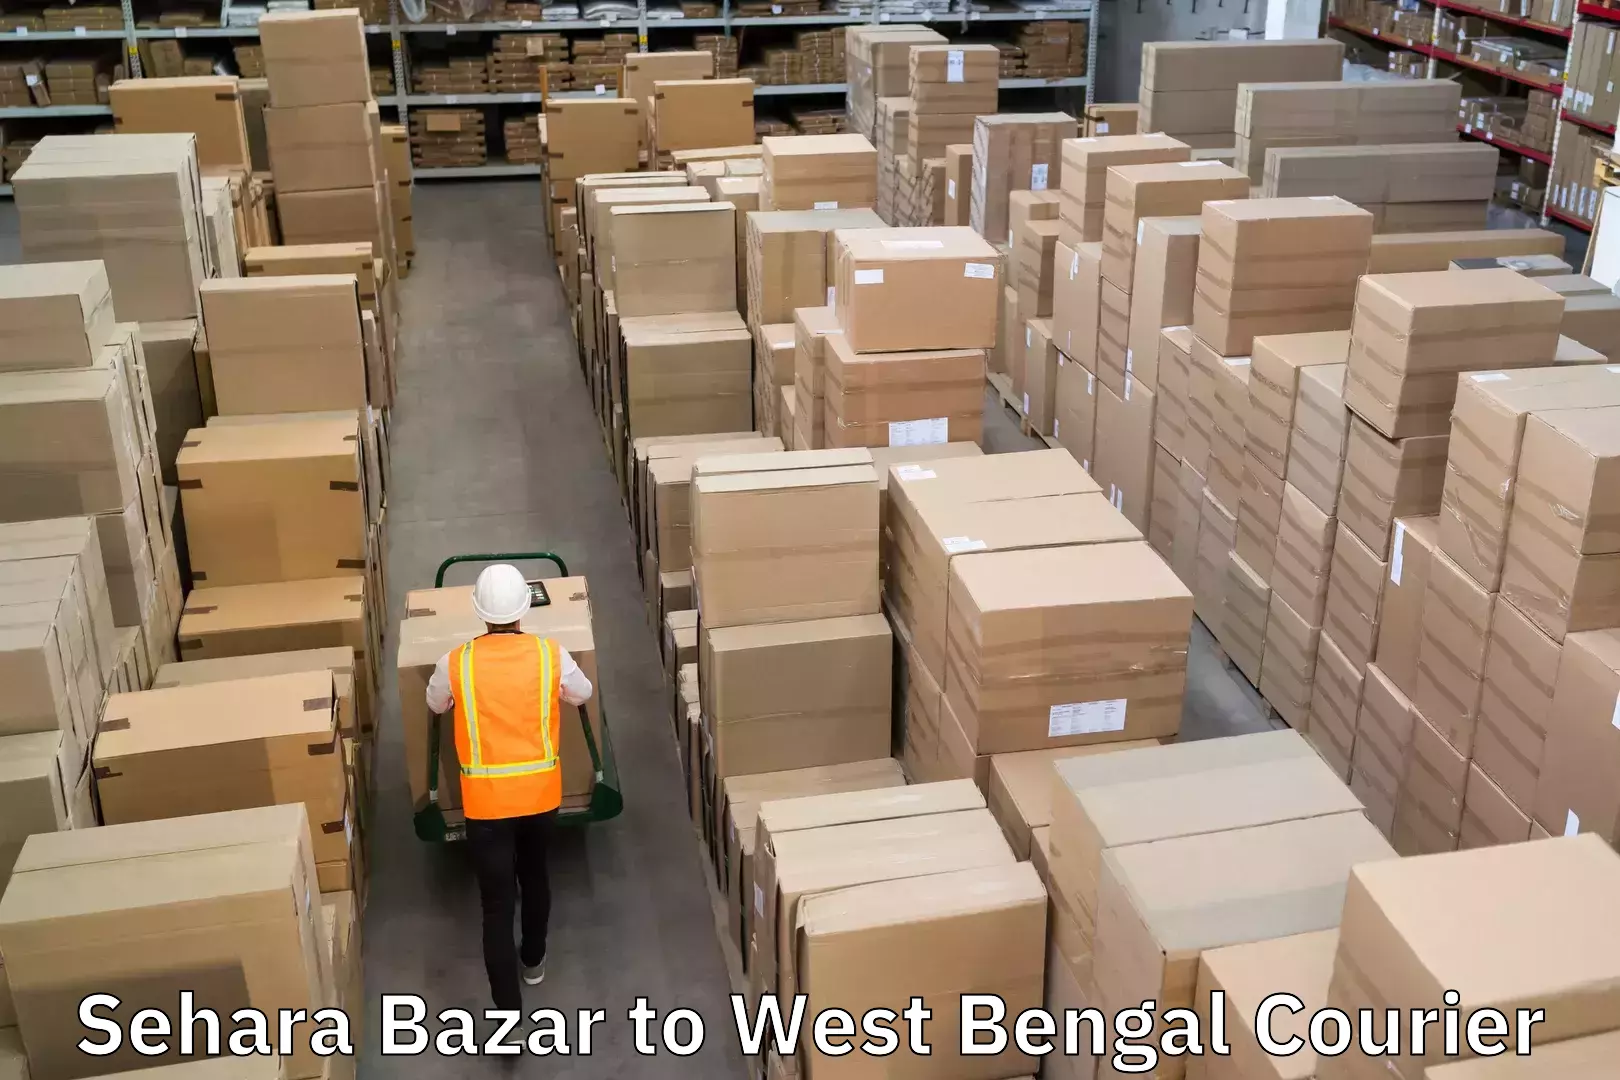 Sustainable shipping practices Sehara Bazar to West Bengal